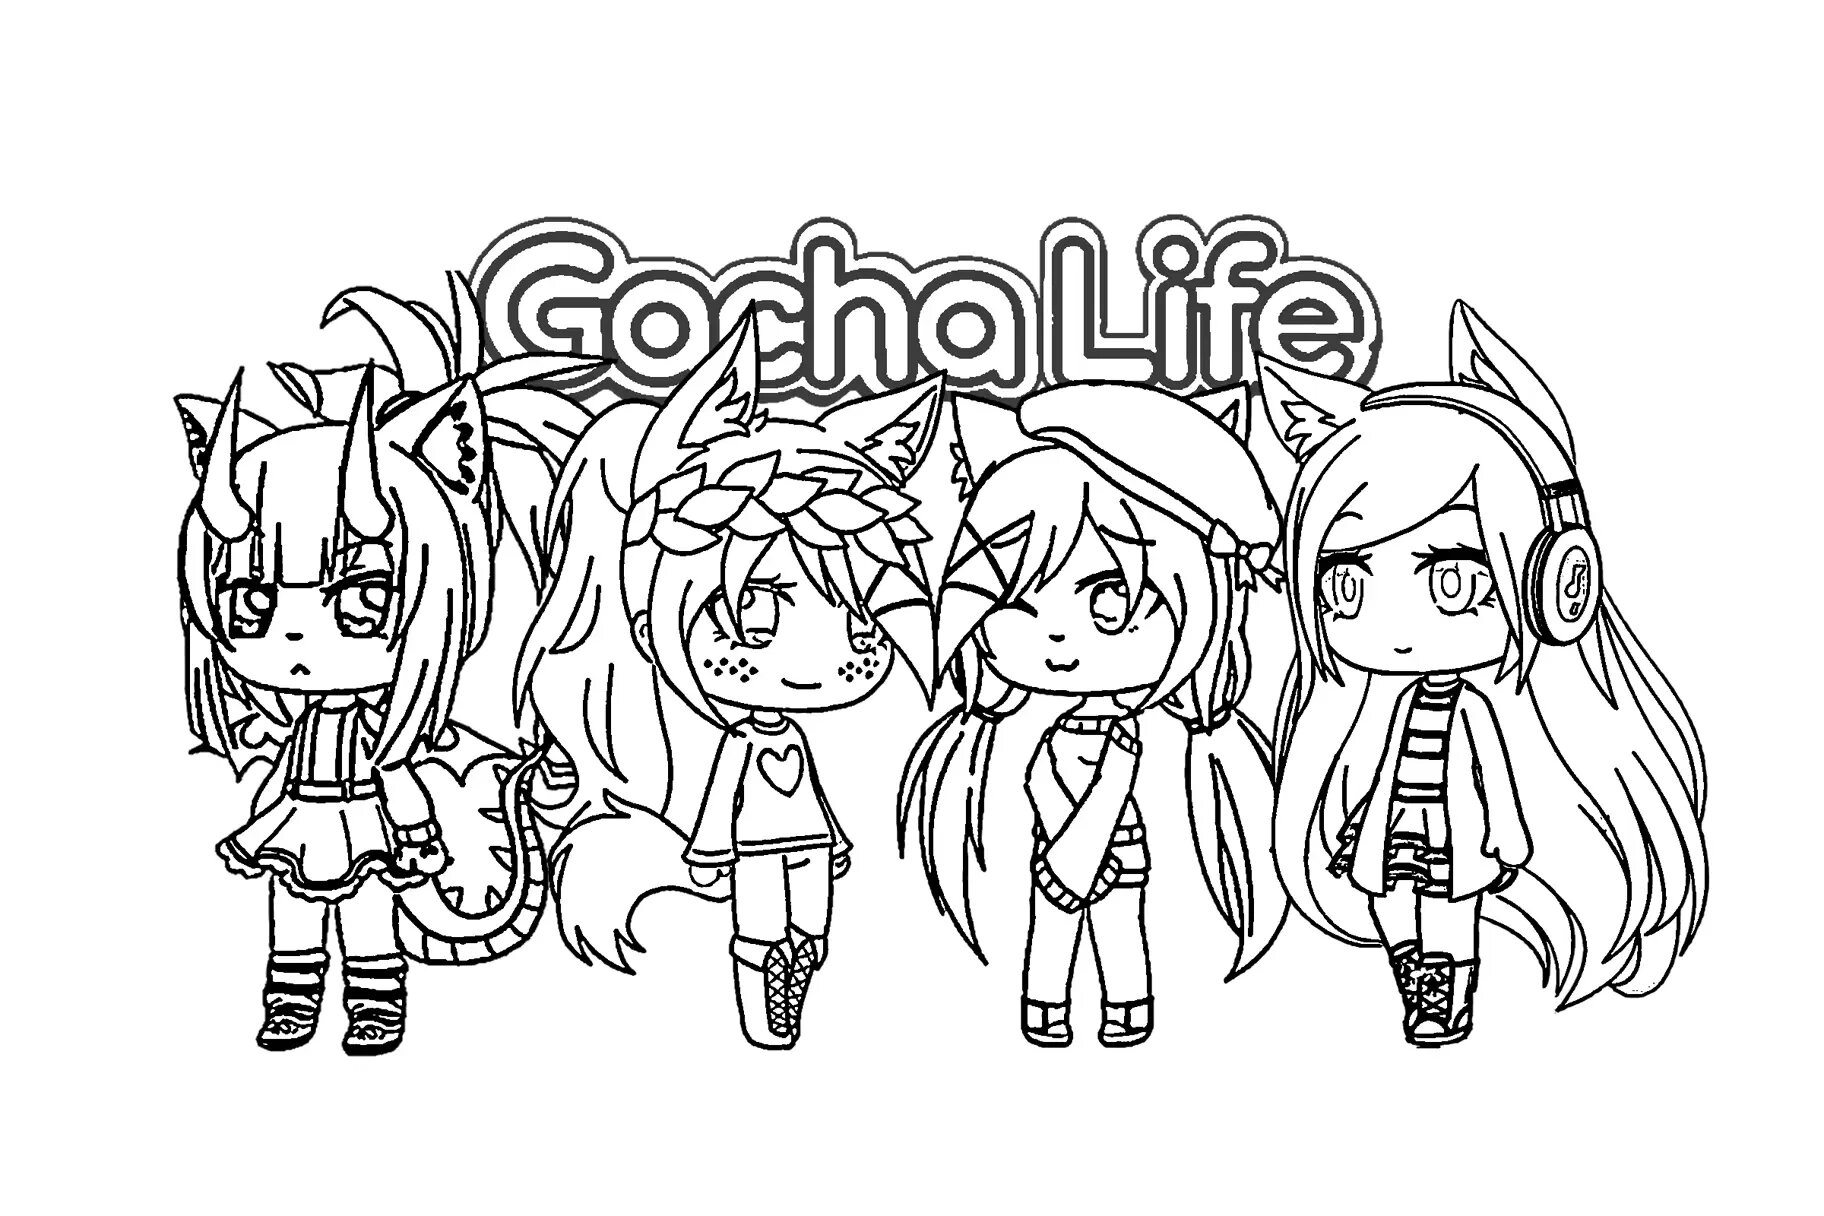 Four Girls in Gacha Life Coloring Pages